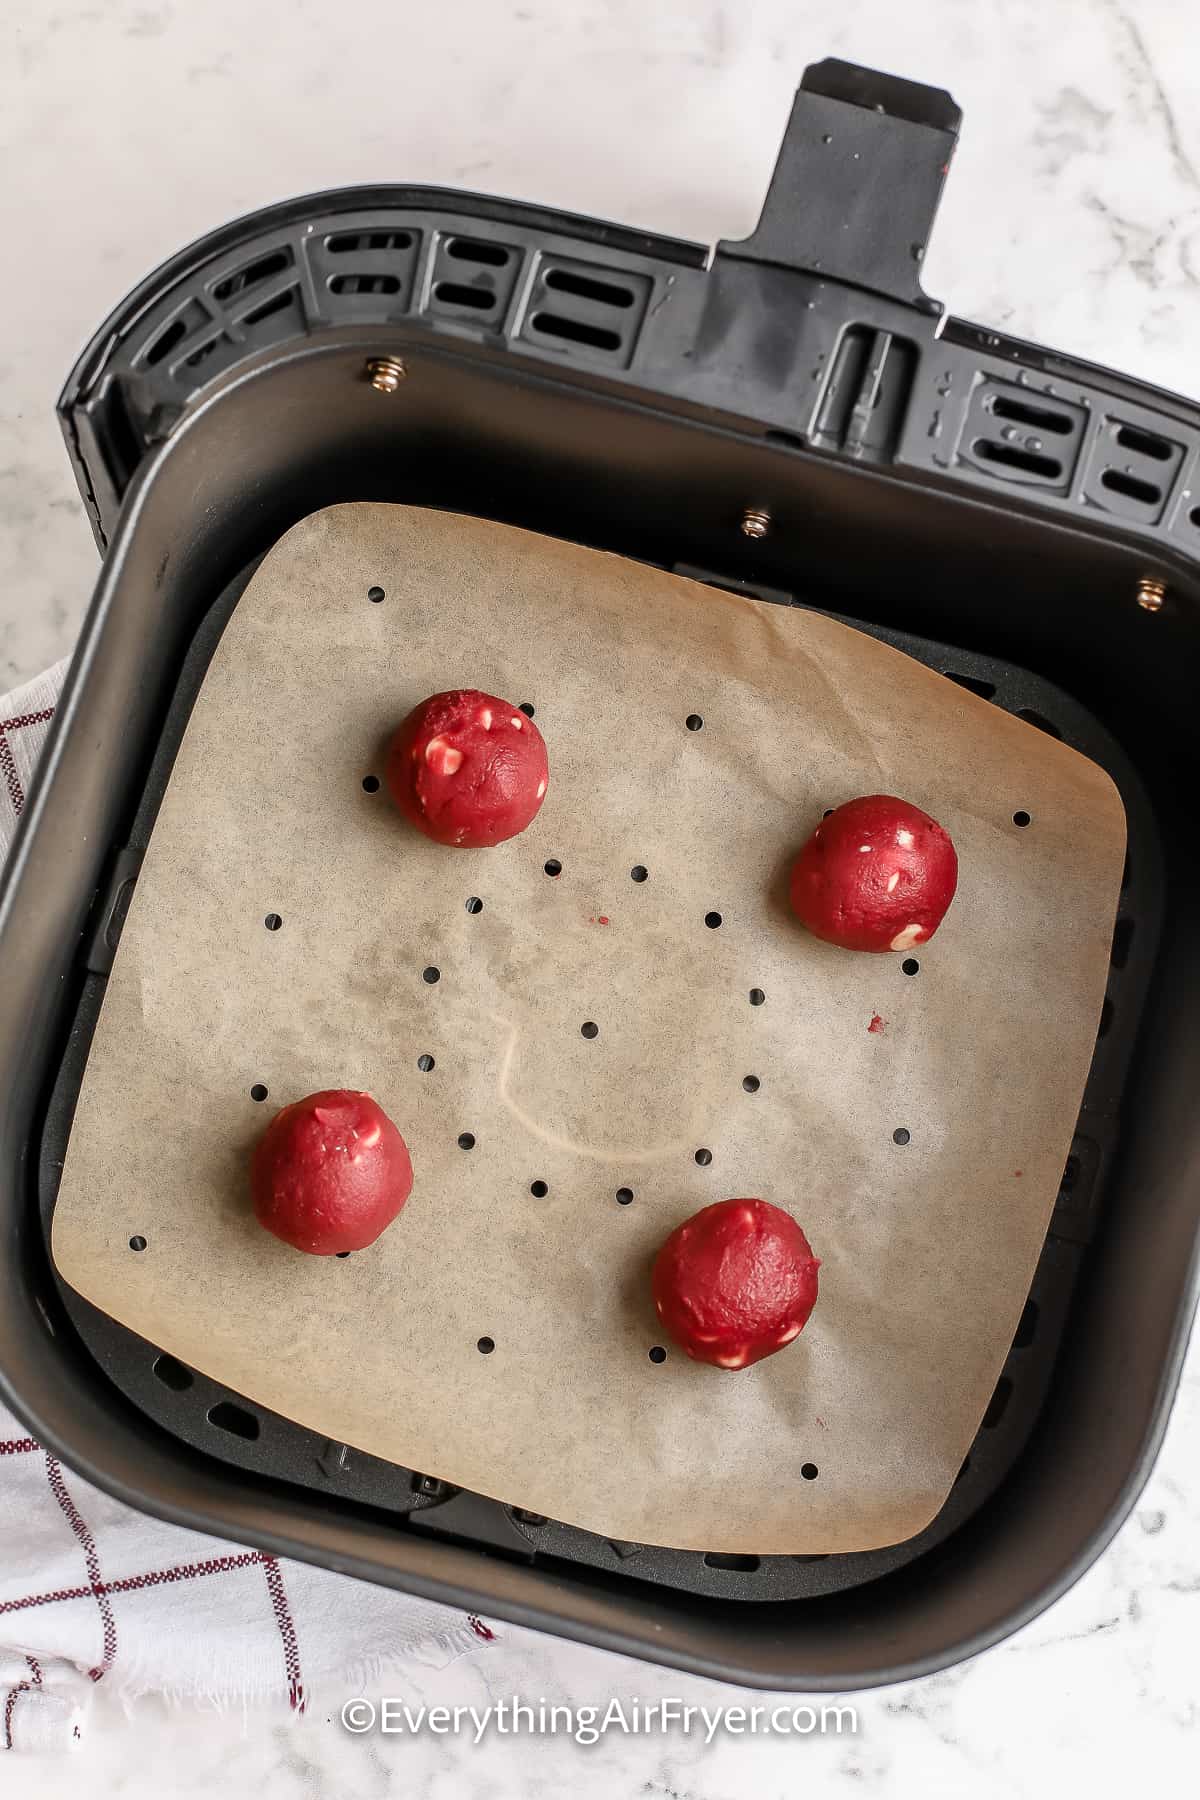 Four Red Velvet Chocolate Chips Cookie dough balls in an air fryer basket